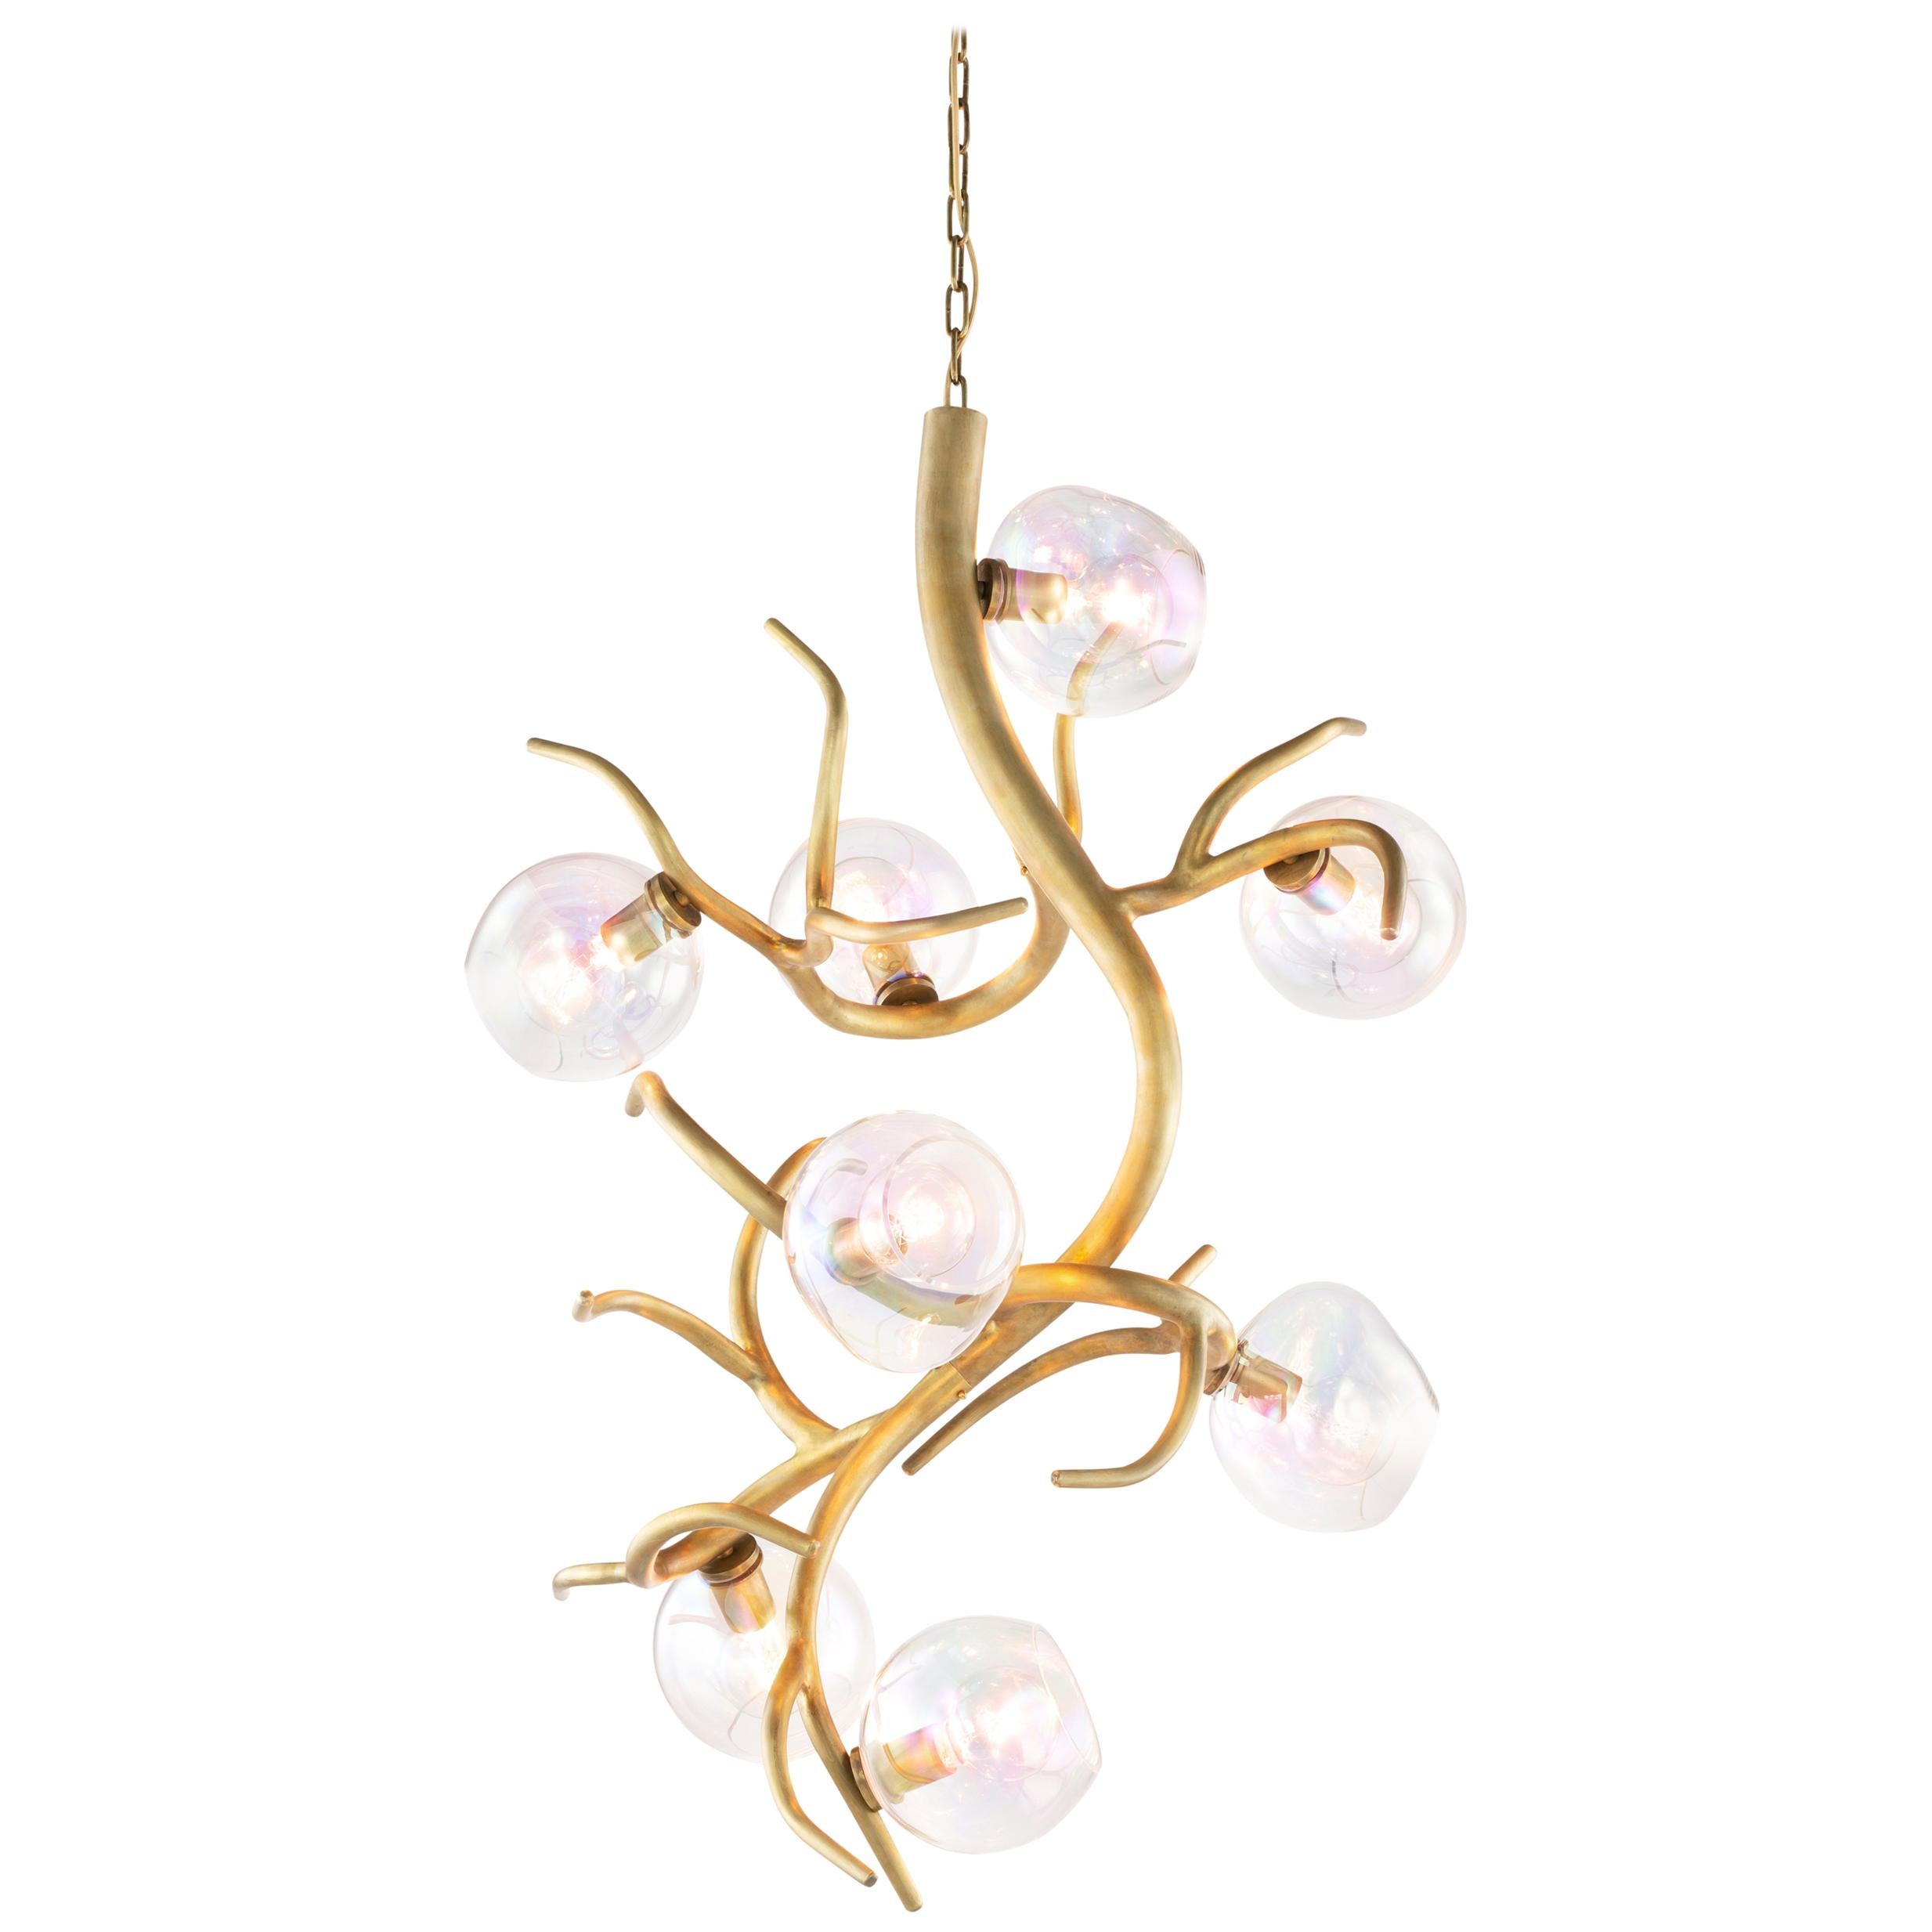 Modern Pendant with Colored Glass in a Brass Burnished Finish, Ersa Collection